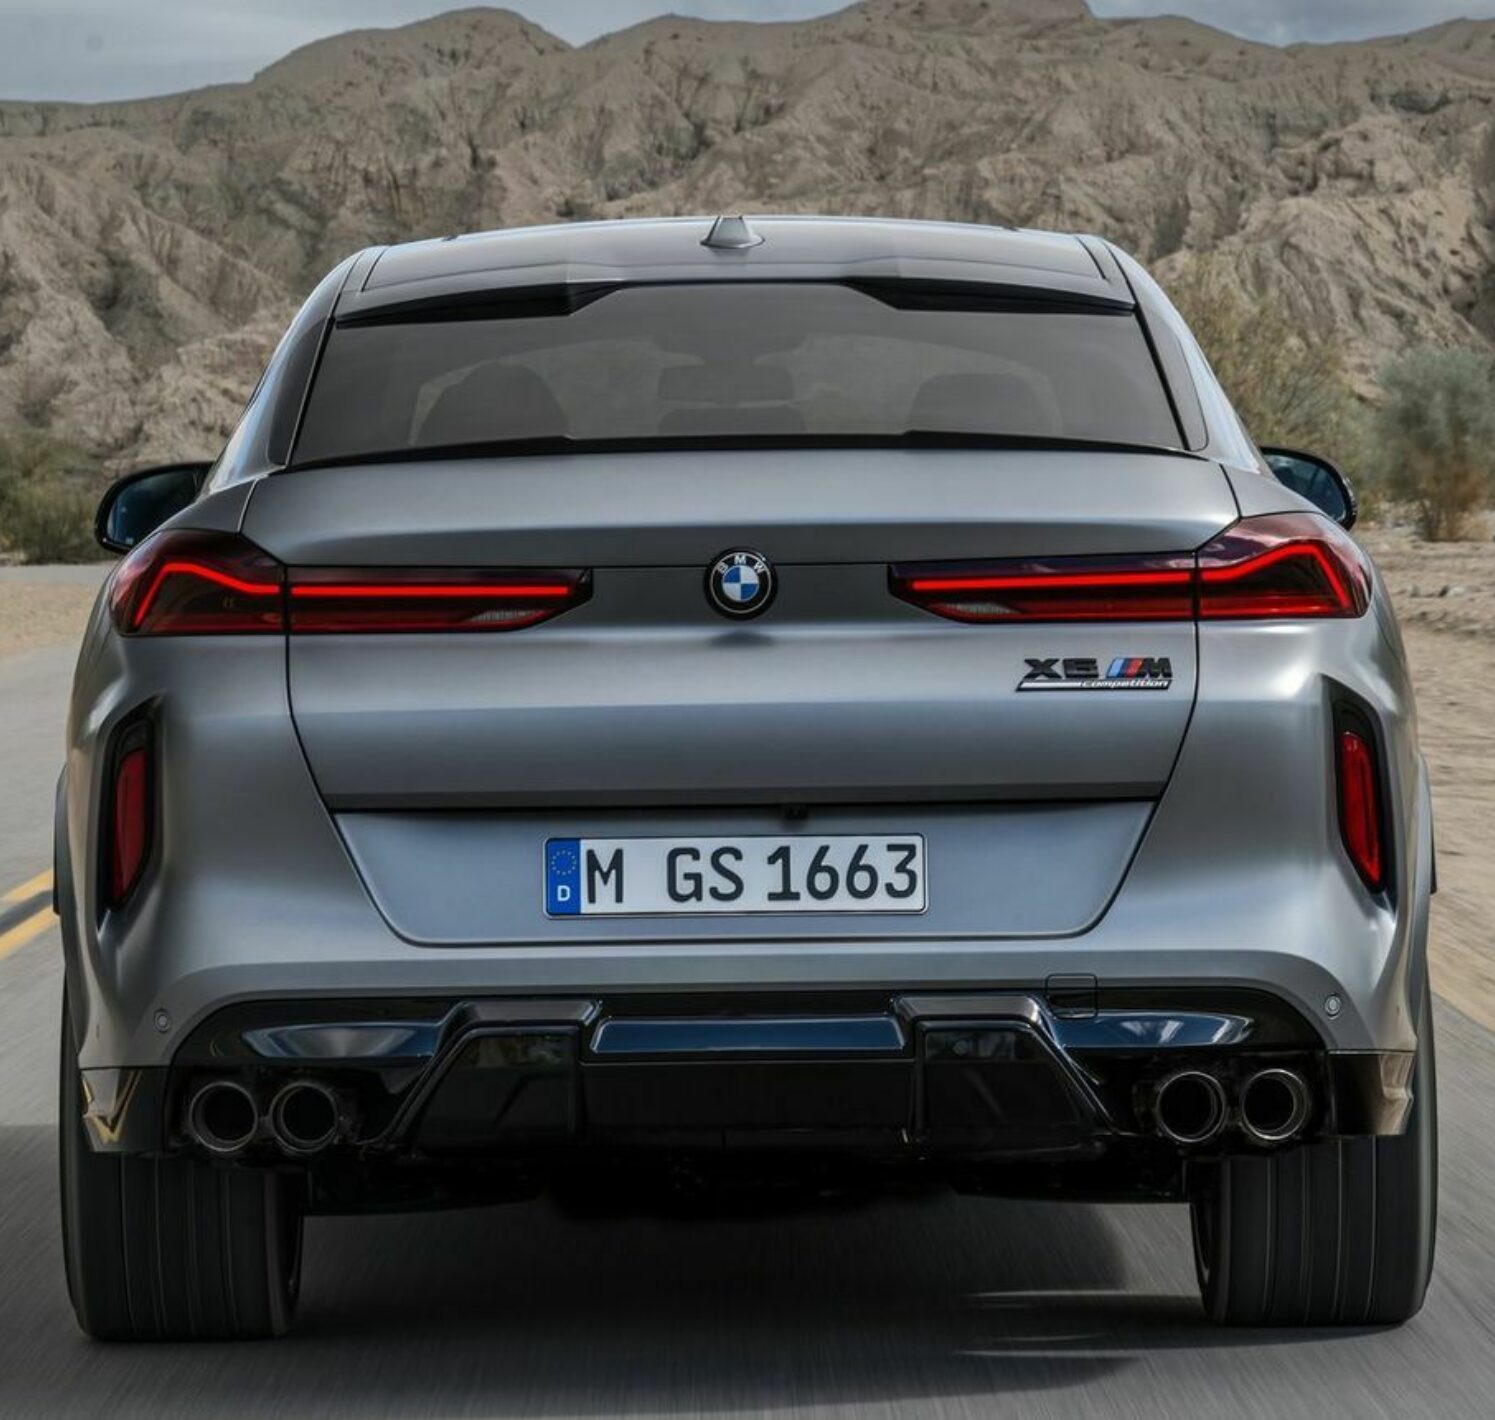 https://autofilter.sk/assets/images/x6-m-competition/gallery/bmw-x6-m-competition-7-galeria.jpg - obrazok